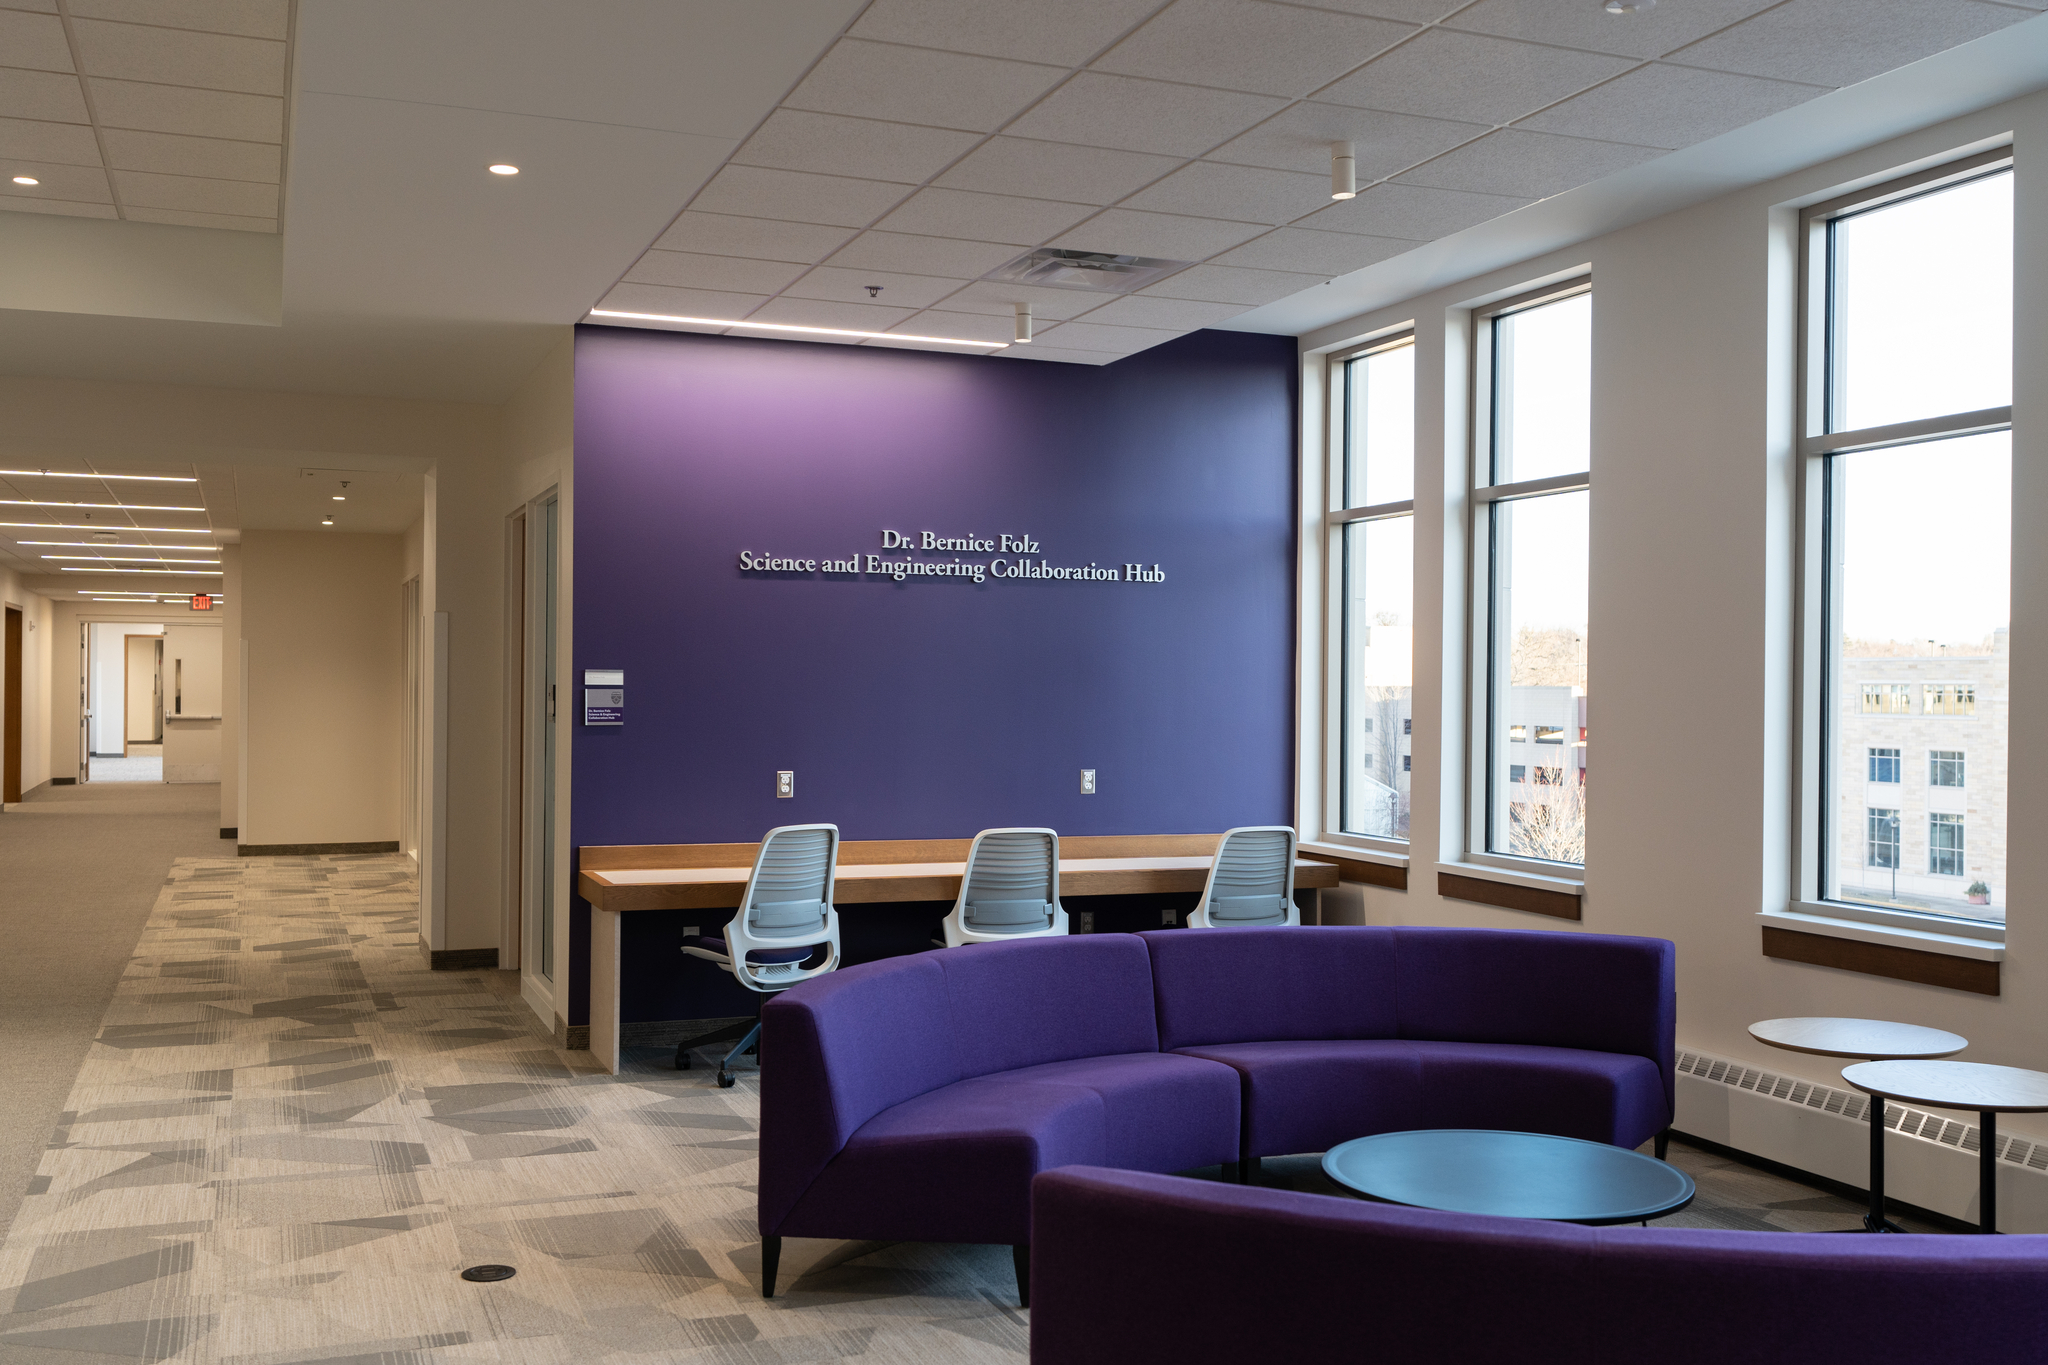 A collaboration area with purple couches and study area